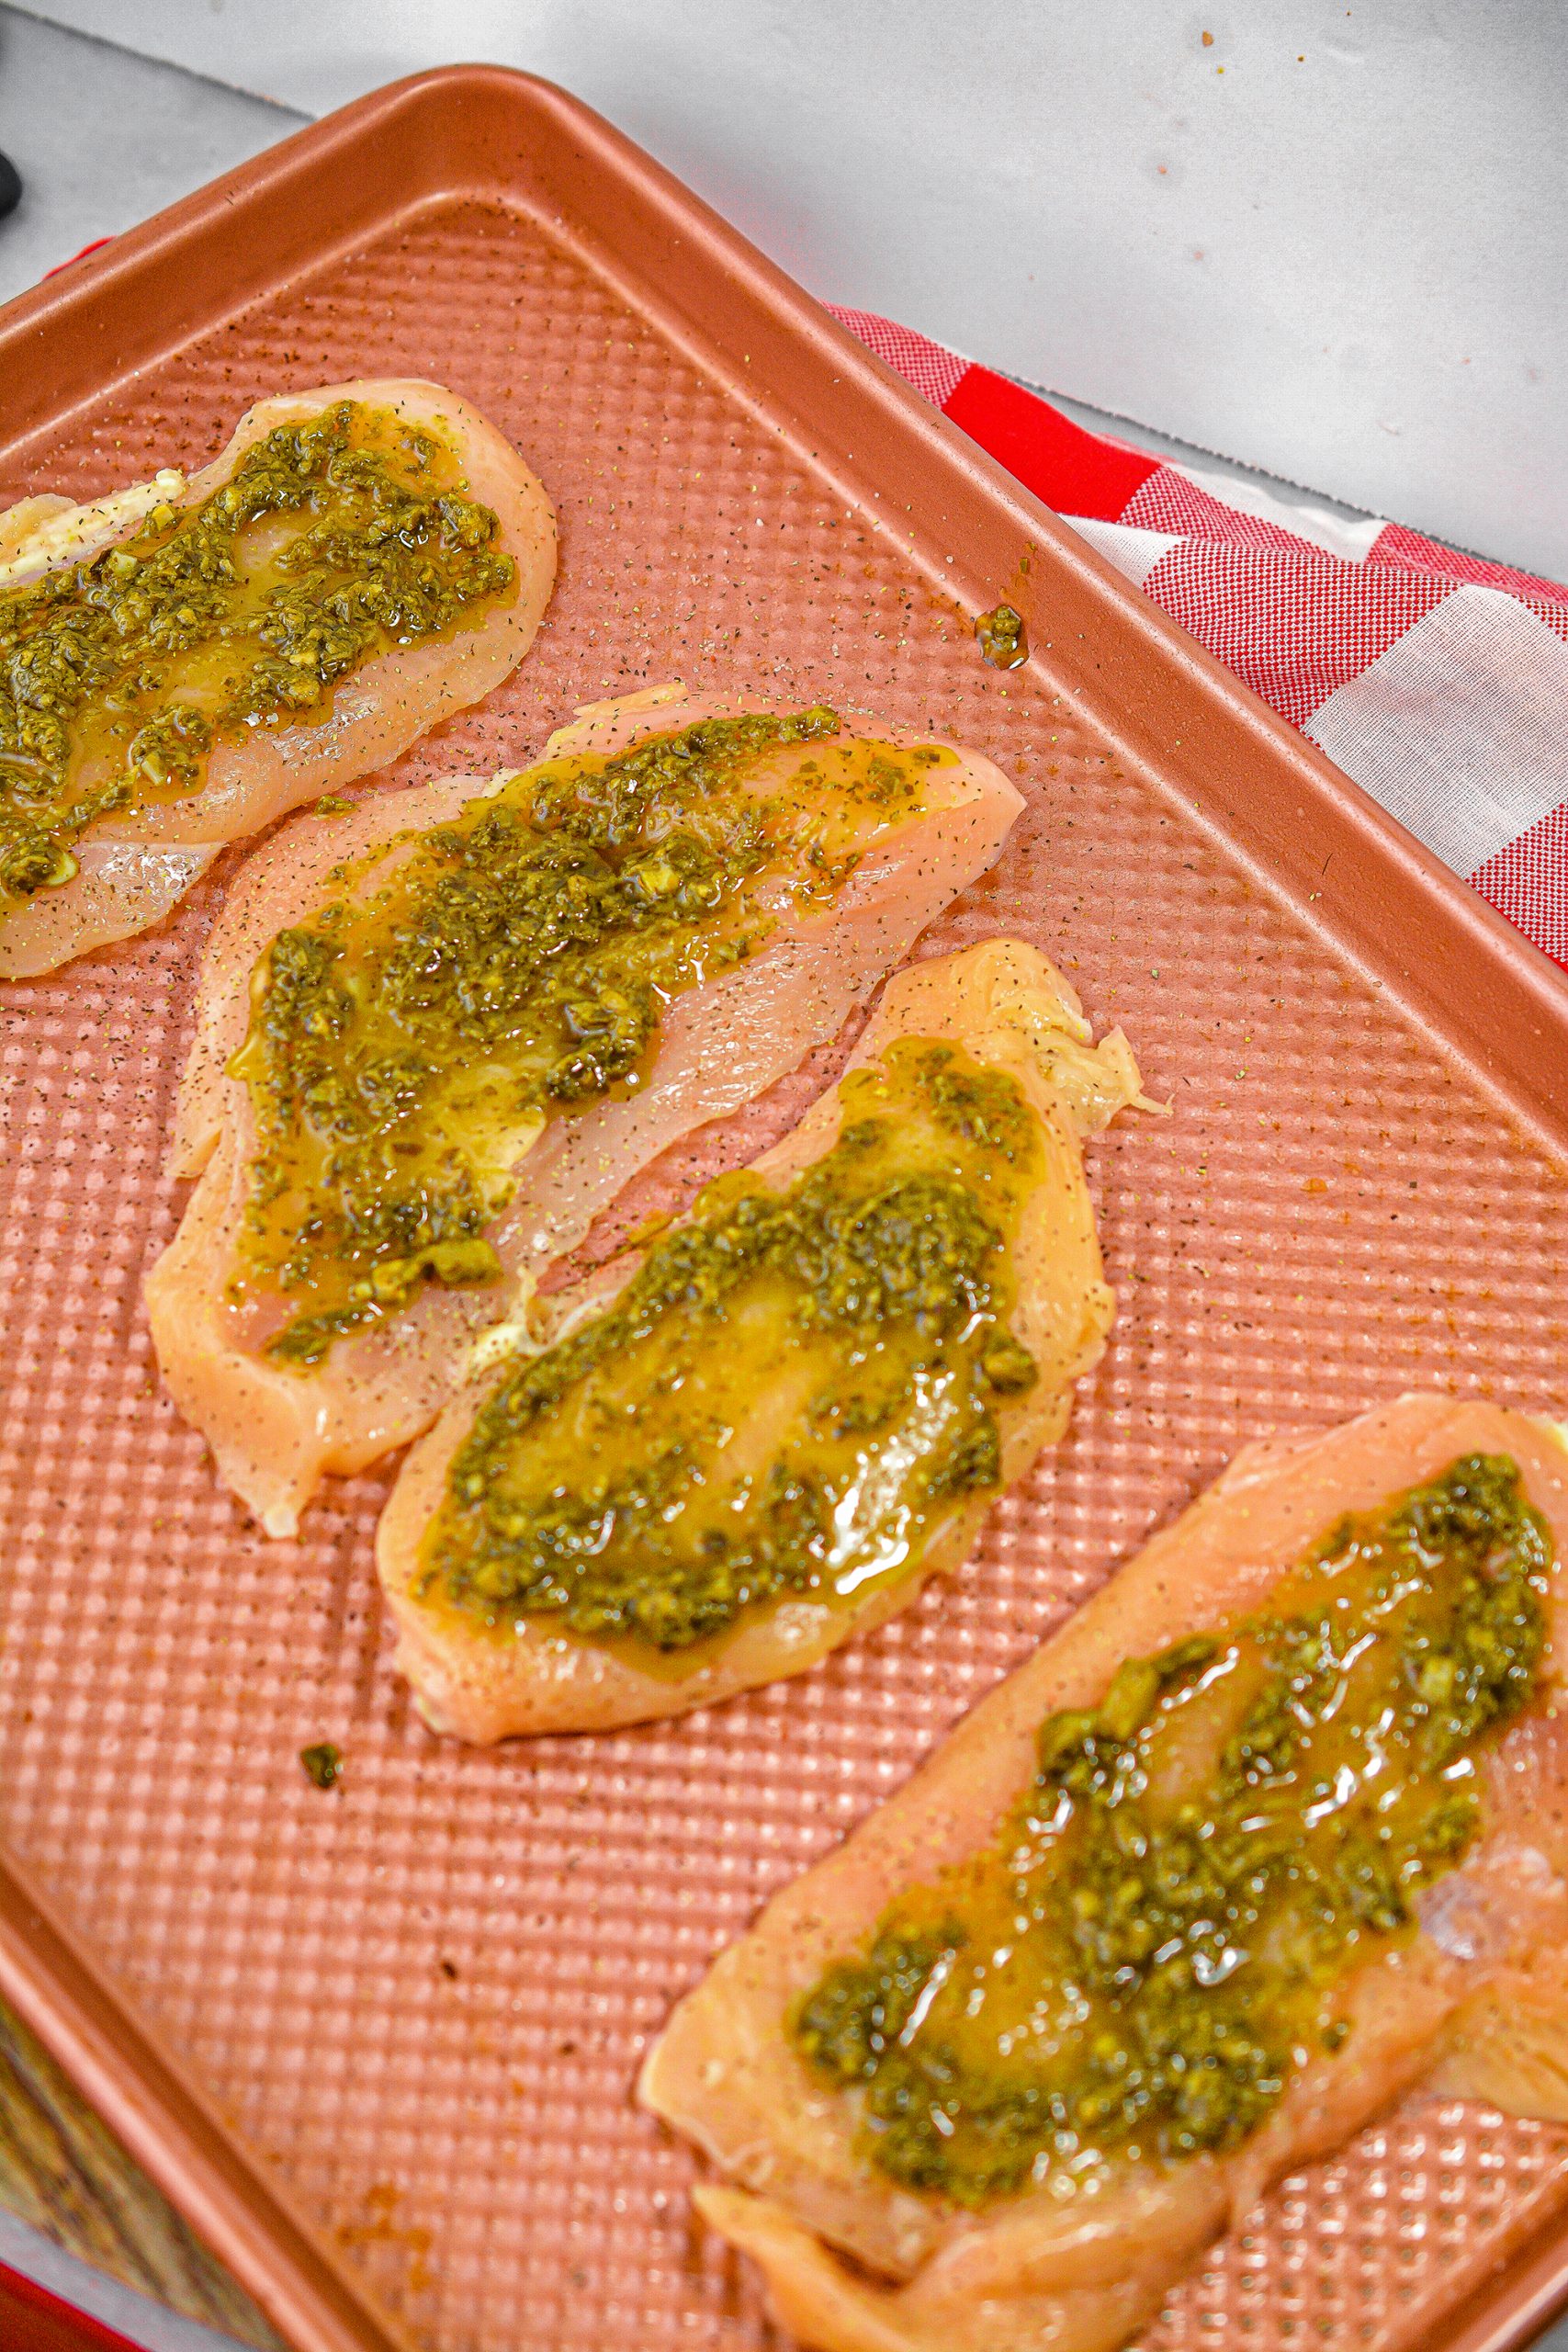 Top each piece of chicken with a teaspoon of the pesto.  Bake for 15 minutes